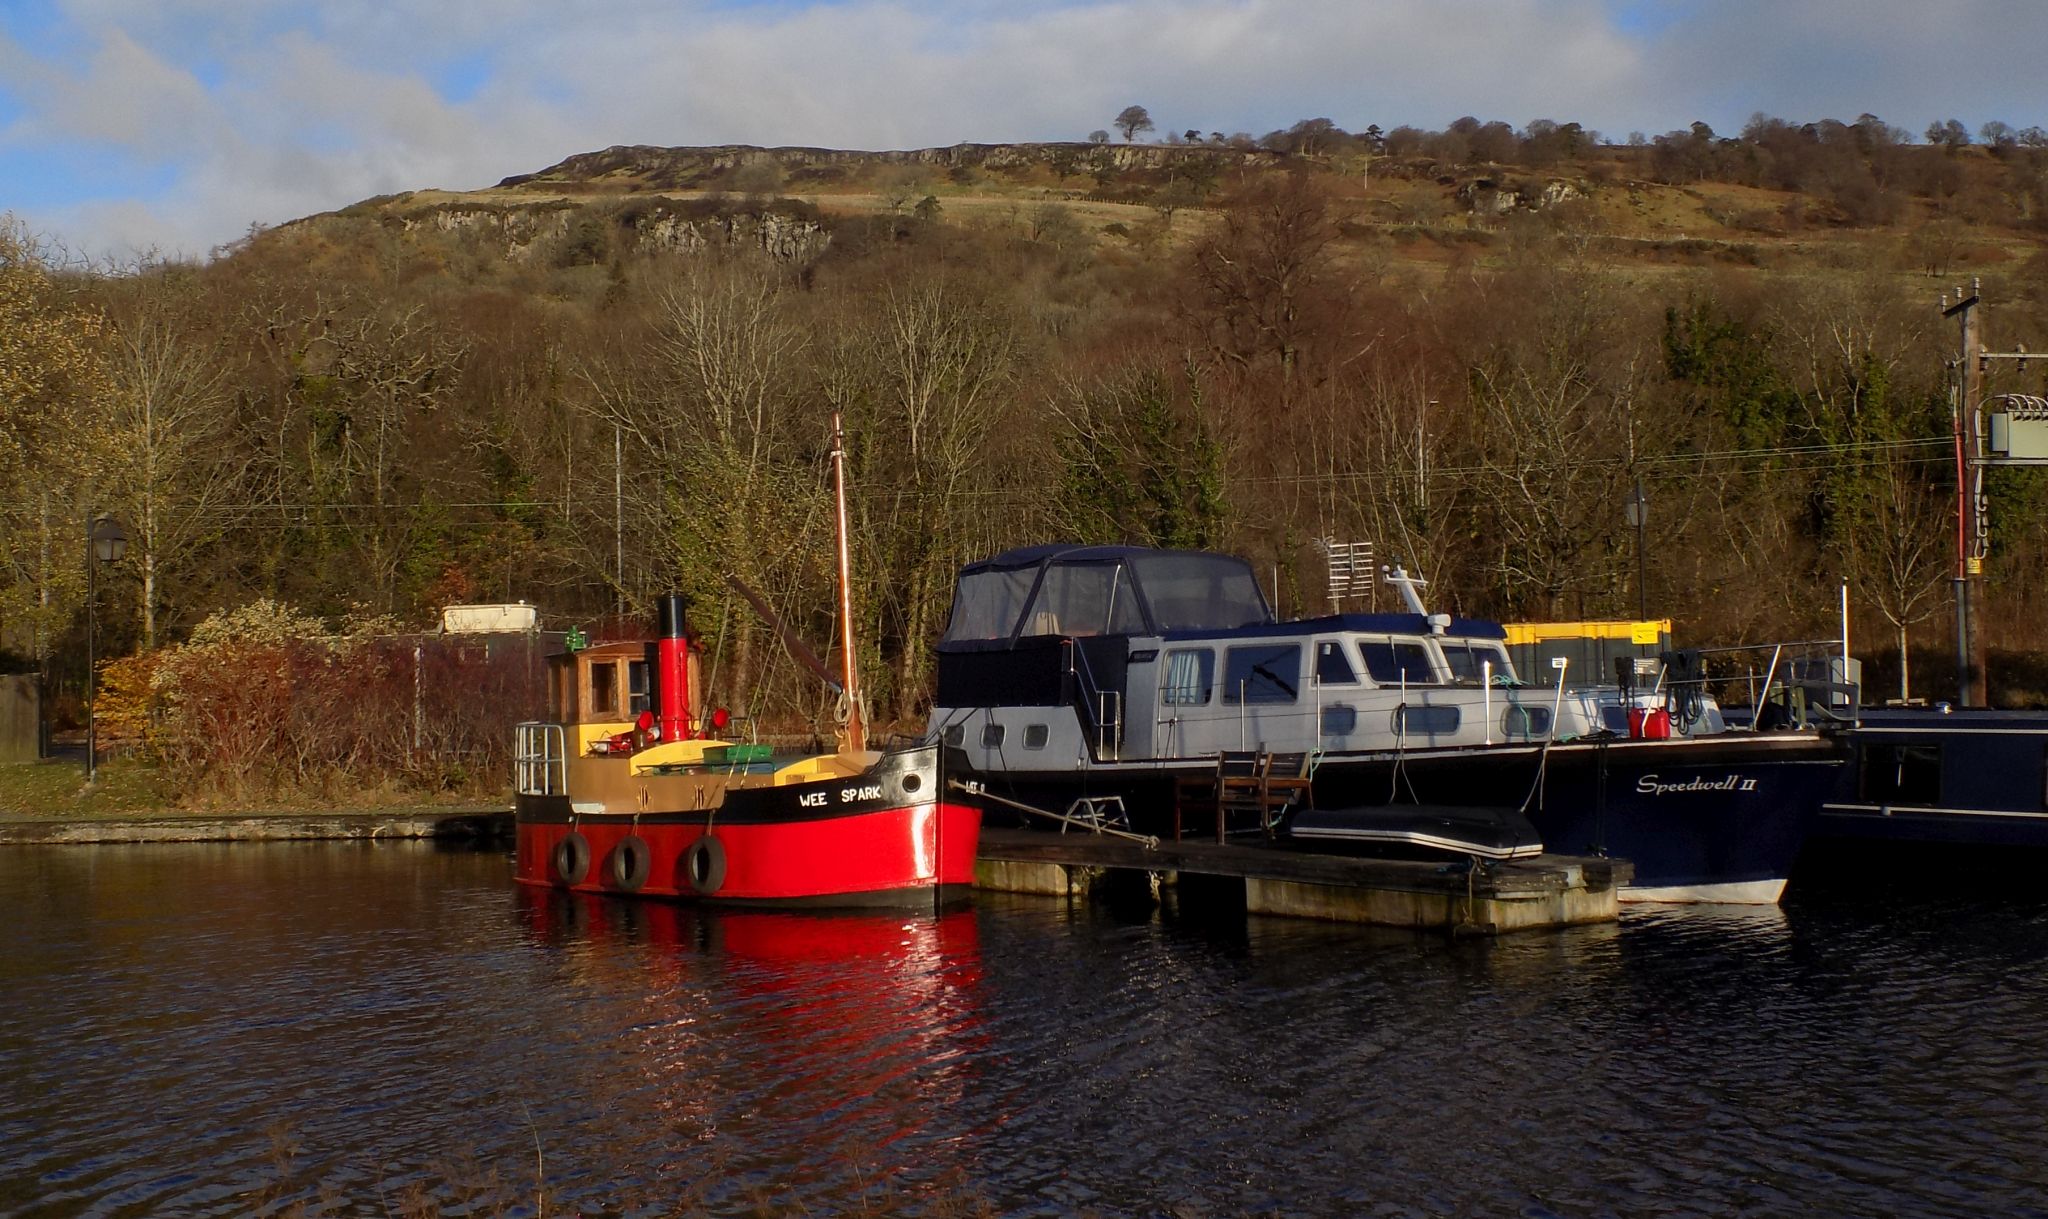 Boats on Forth and Clyde Canal at Bowling Basin